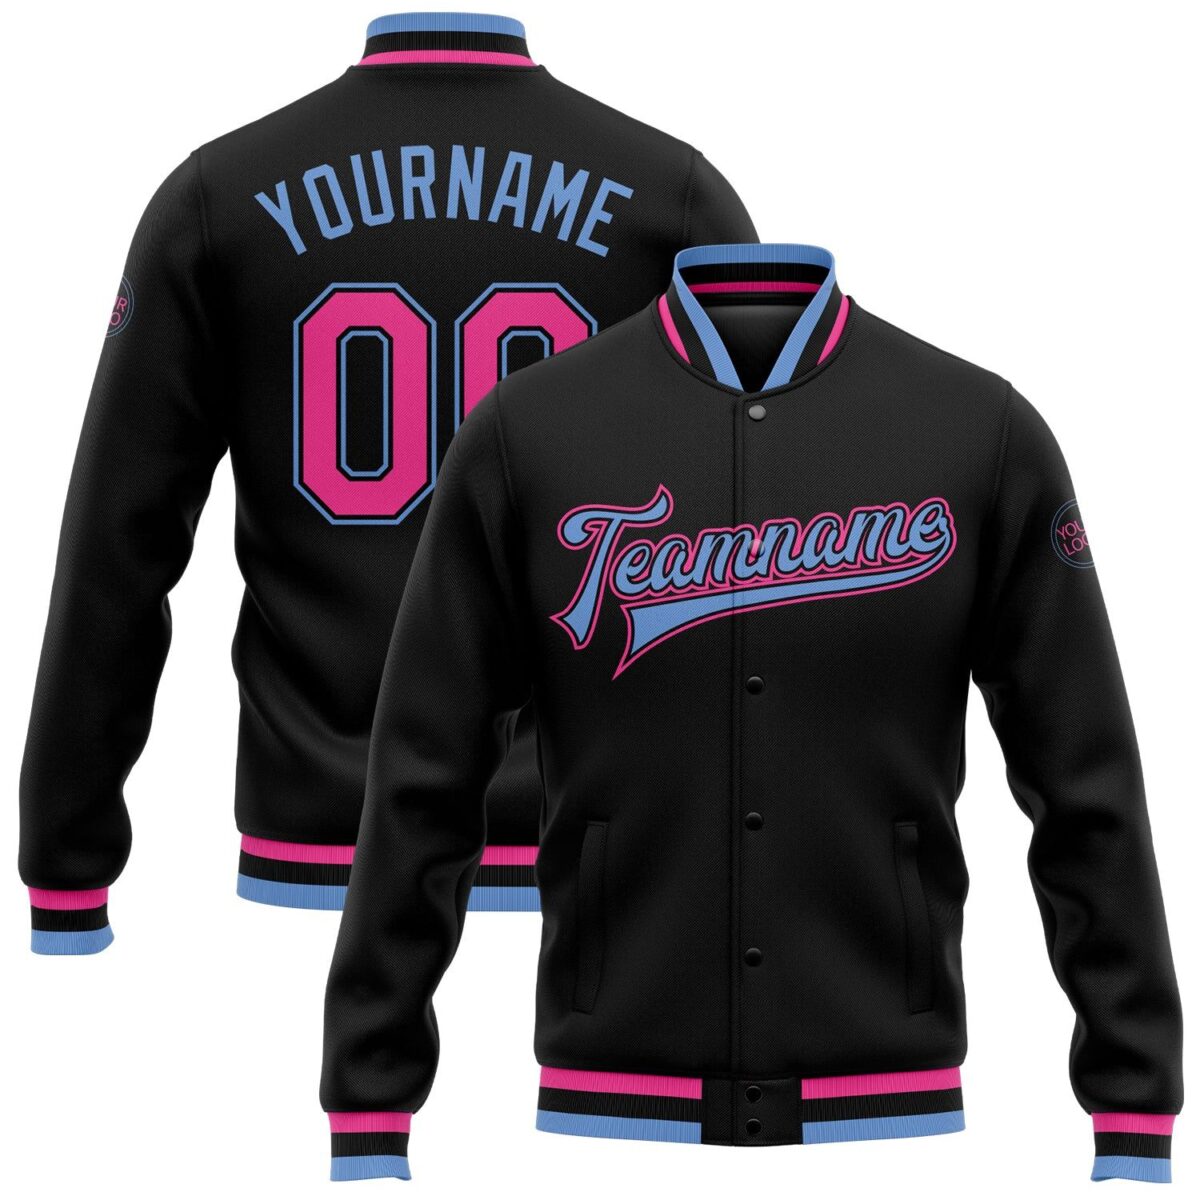 College Student Baseball Jackets with Black & Pink 1